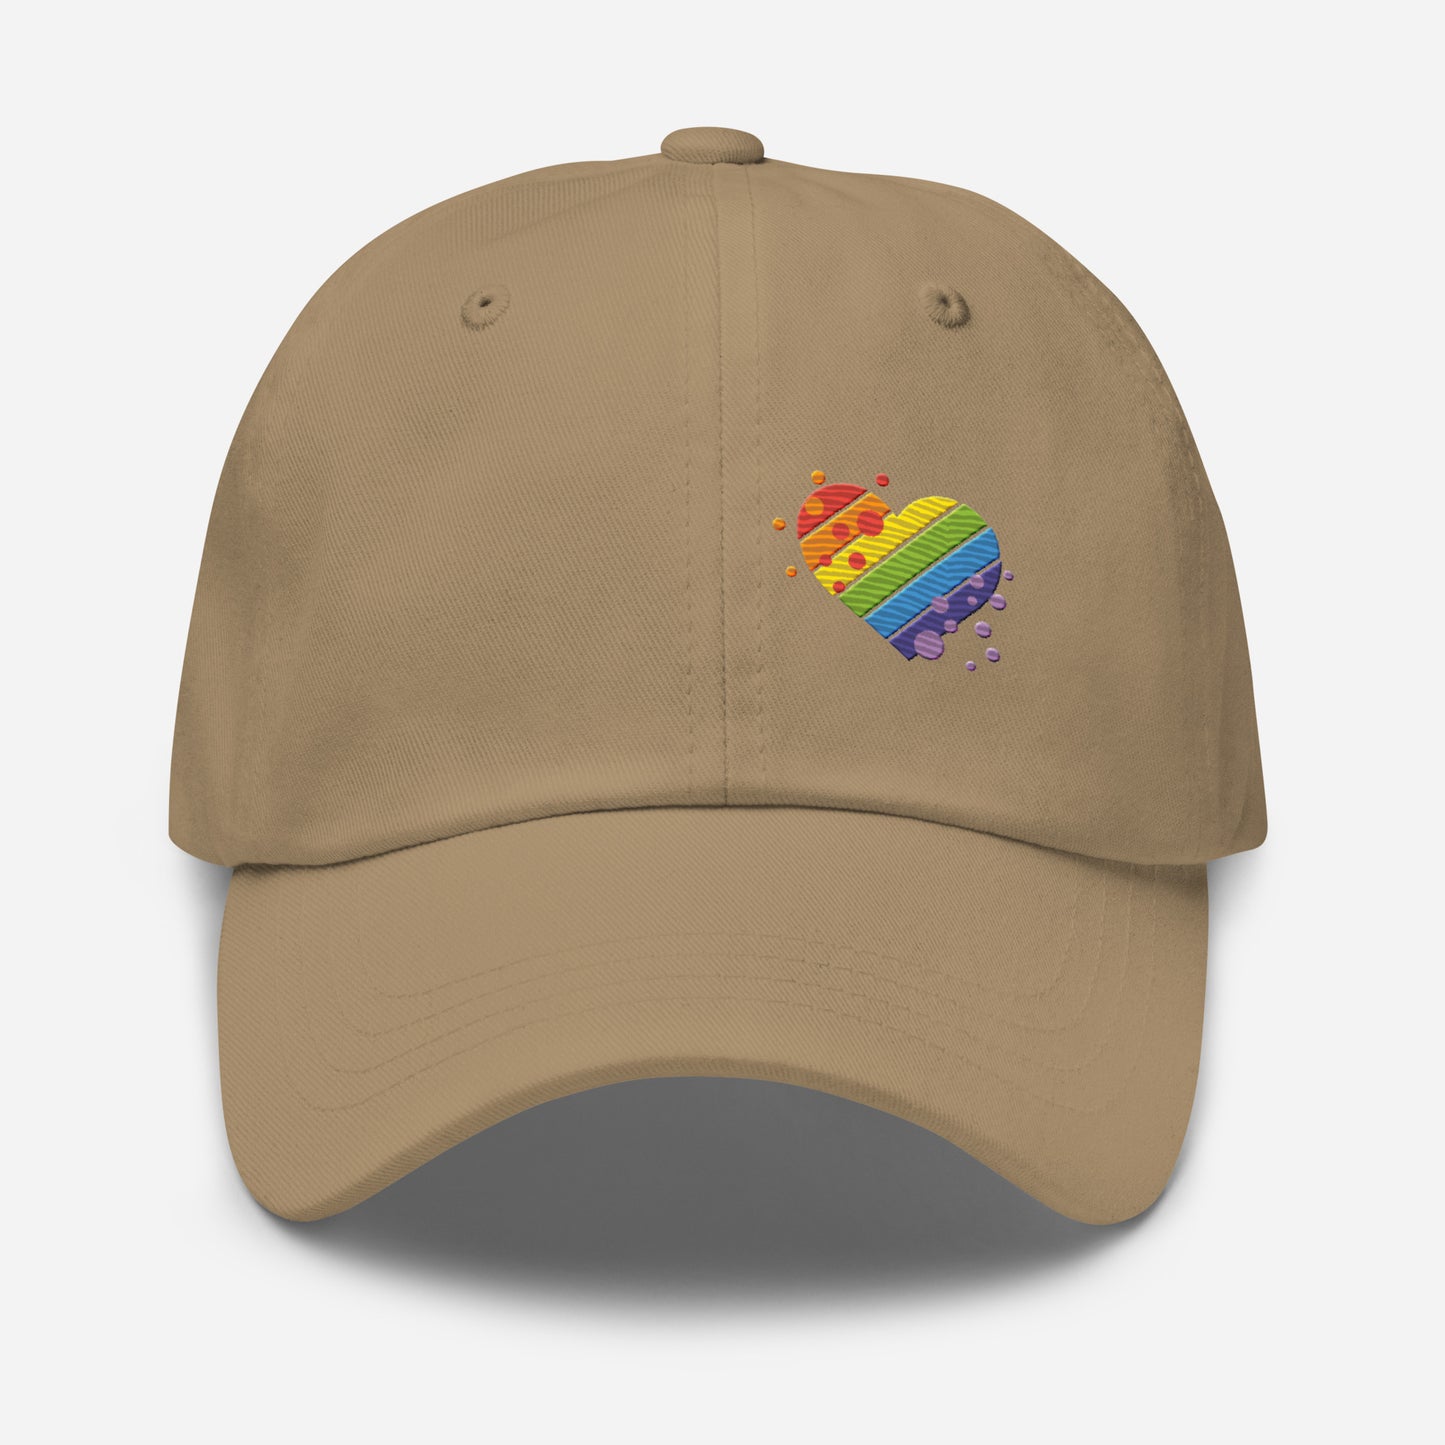 Khaki baseball hat featuring rainbow heart design embroidery with a low profile, adjustable strap.